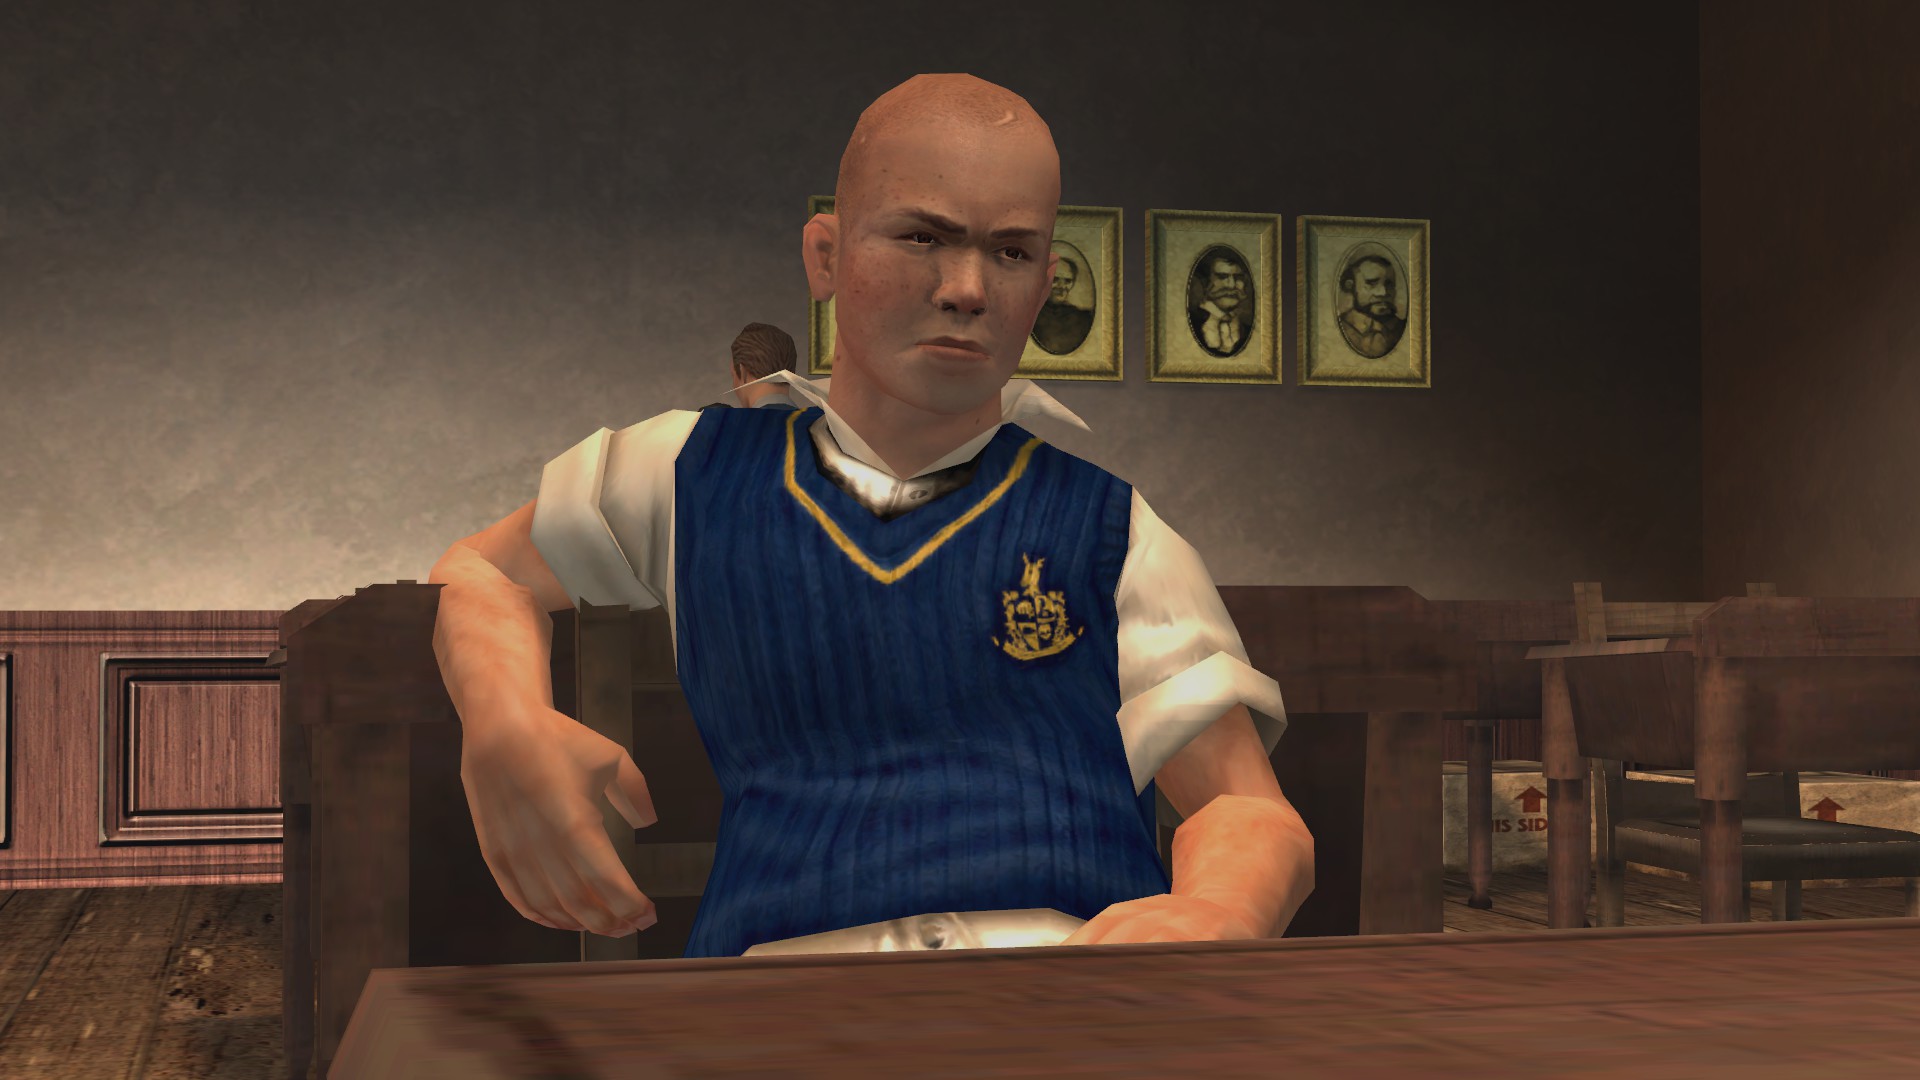 Looks like Bully 2 will be Rockstar's next game after Red Dead Redemption 2 [Rumor]